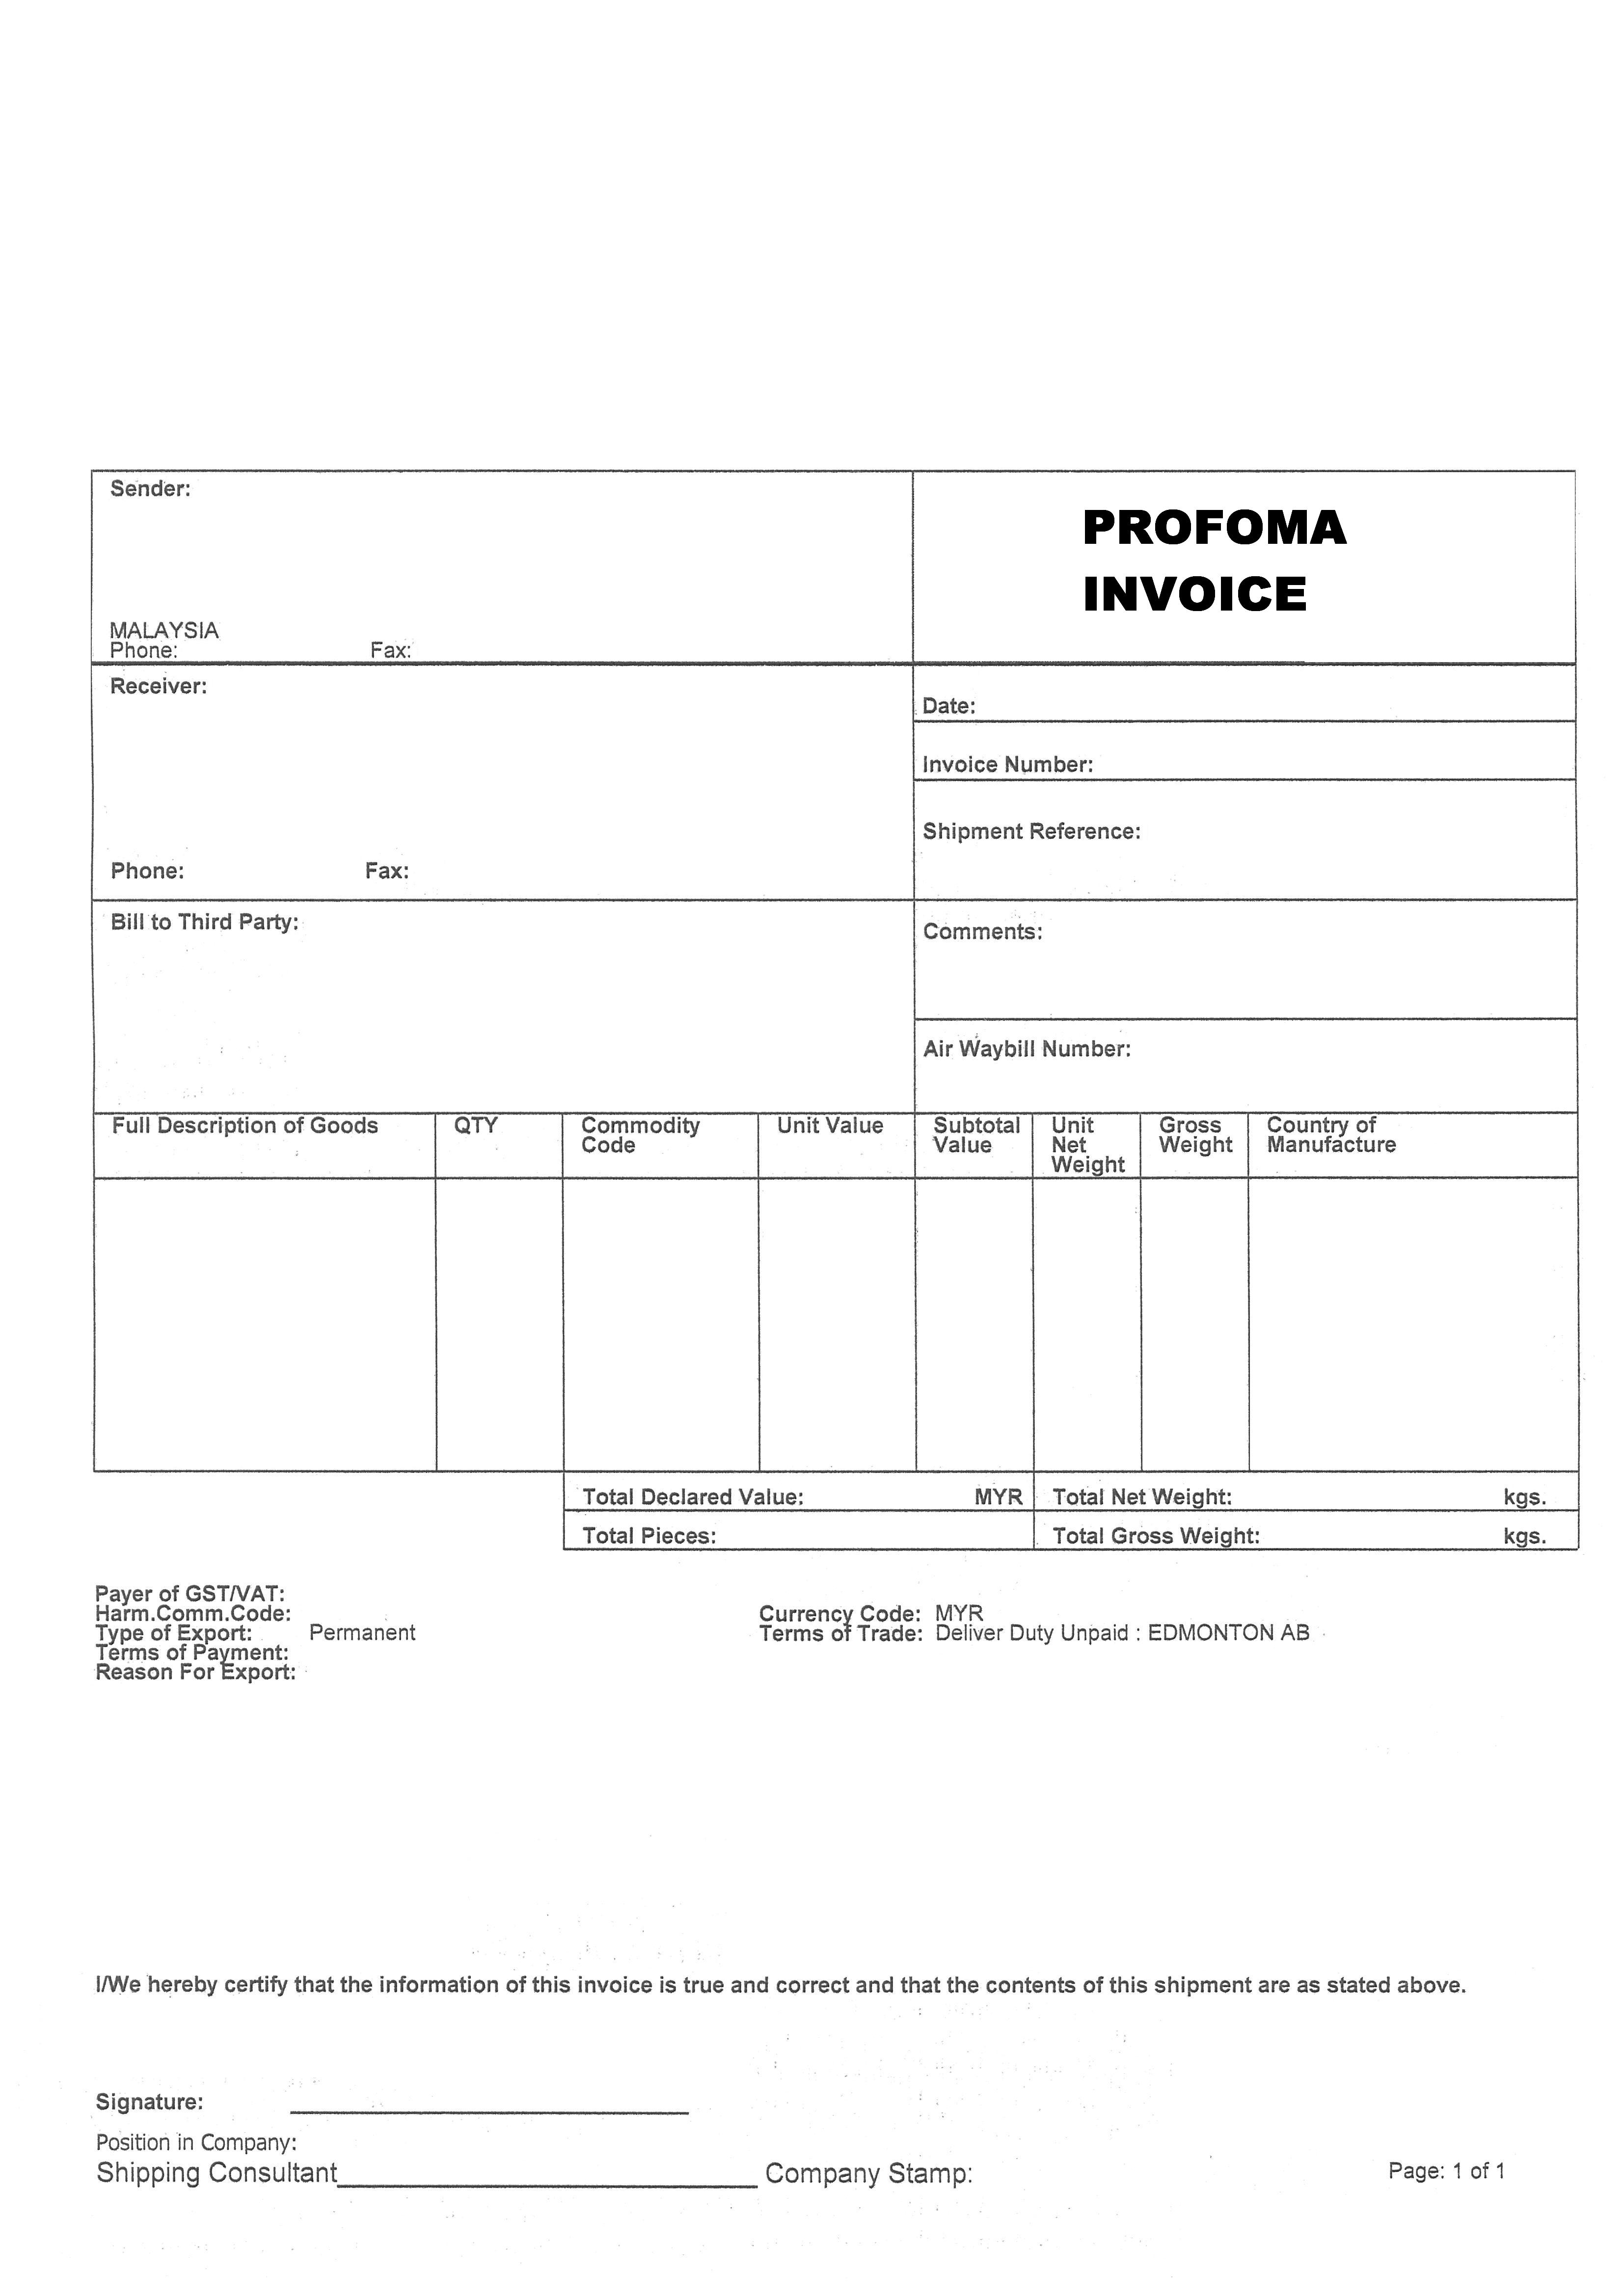 pro forma invoice pro forma invoice example counseldynu 3308 X 4678